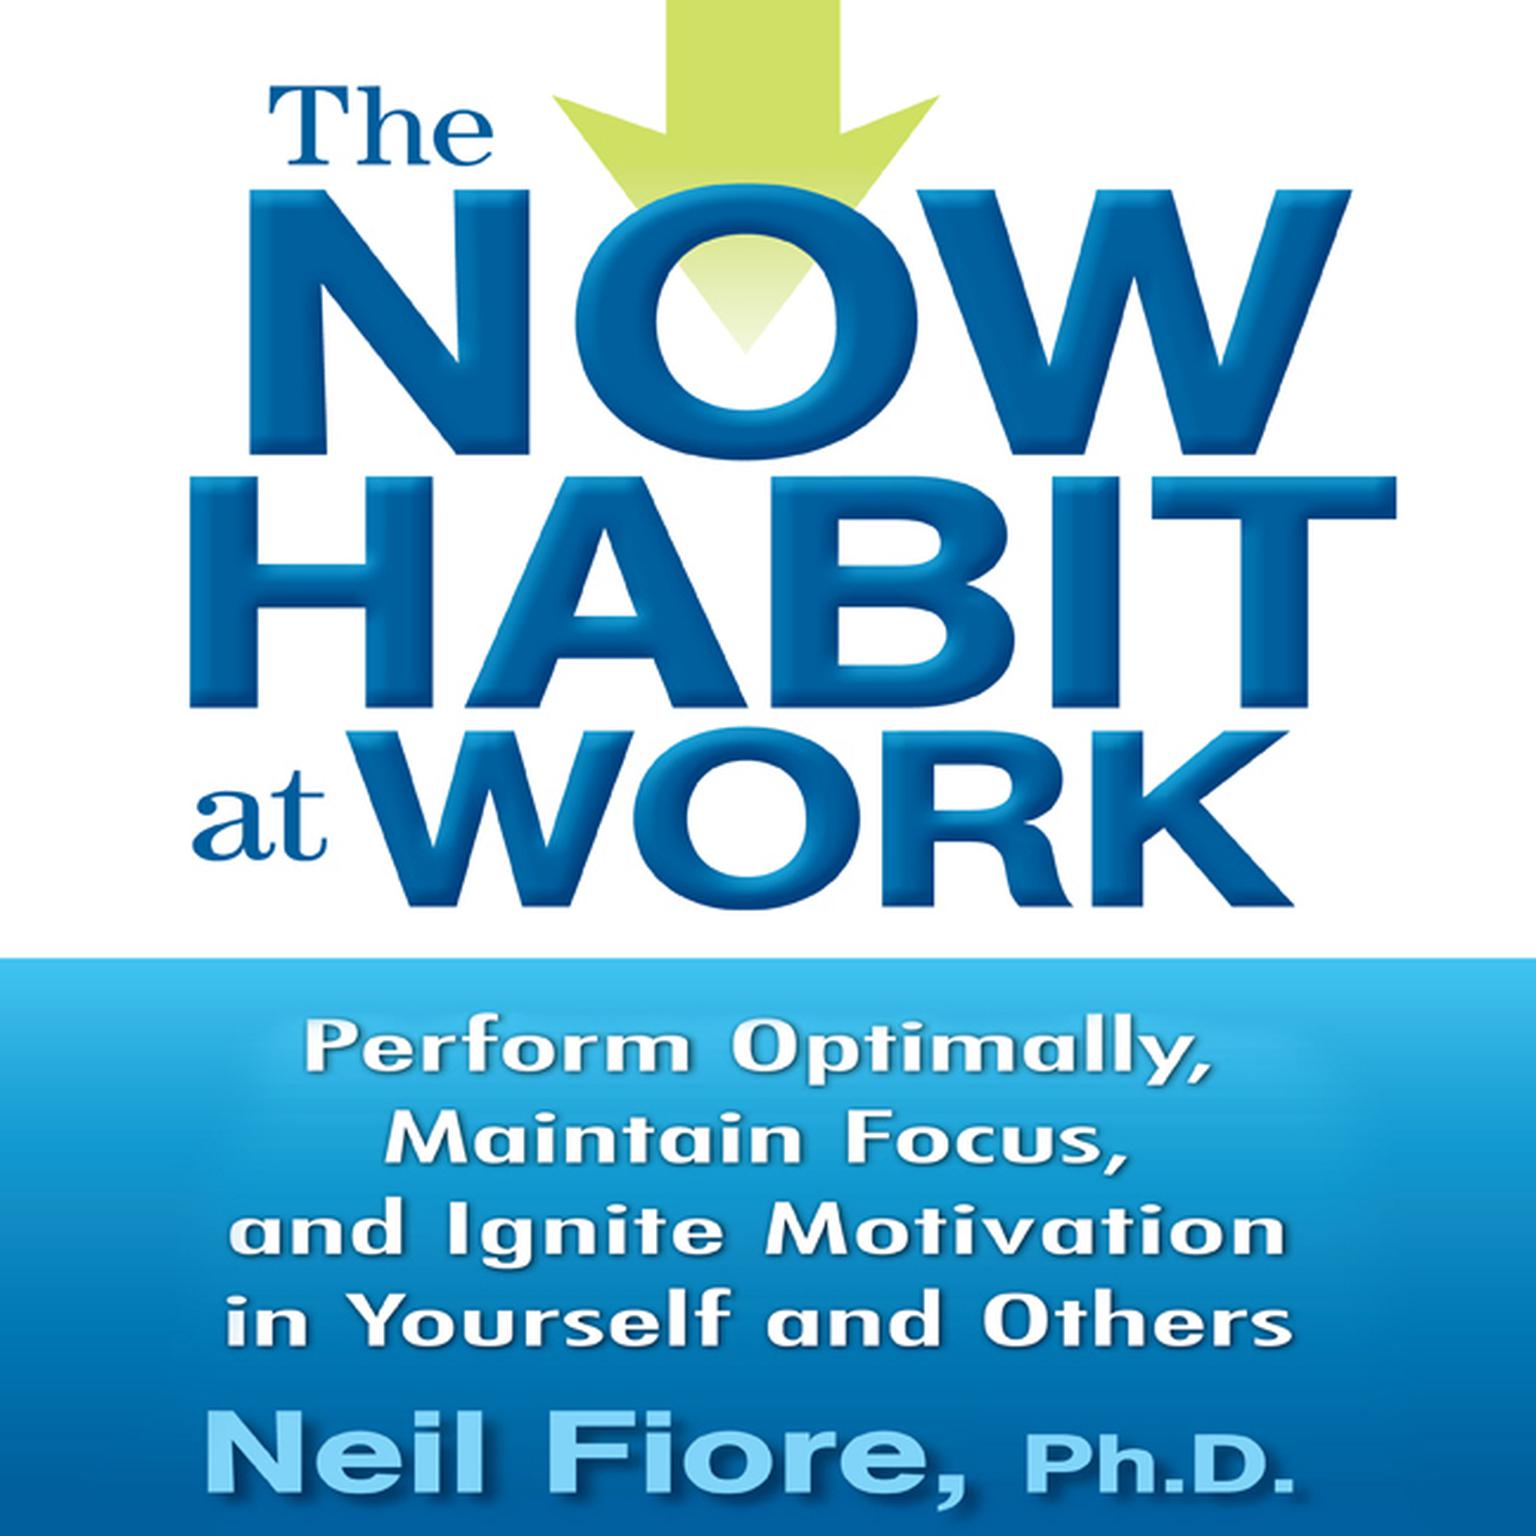 The Now Habit at Work: Perform Optimally, Maintain Focus, and Ignite Motivation in Yourself and Others Audiobook, by Neil Fiore